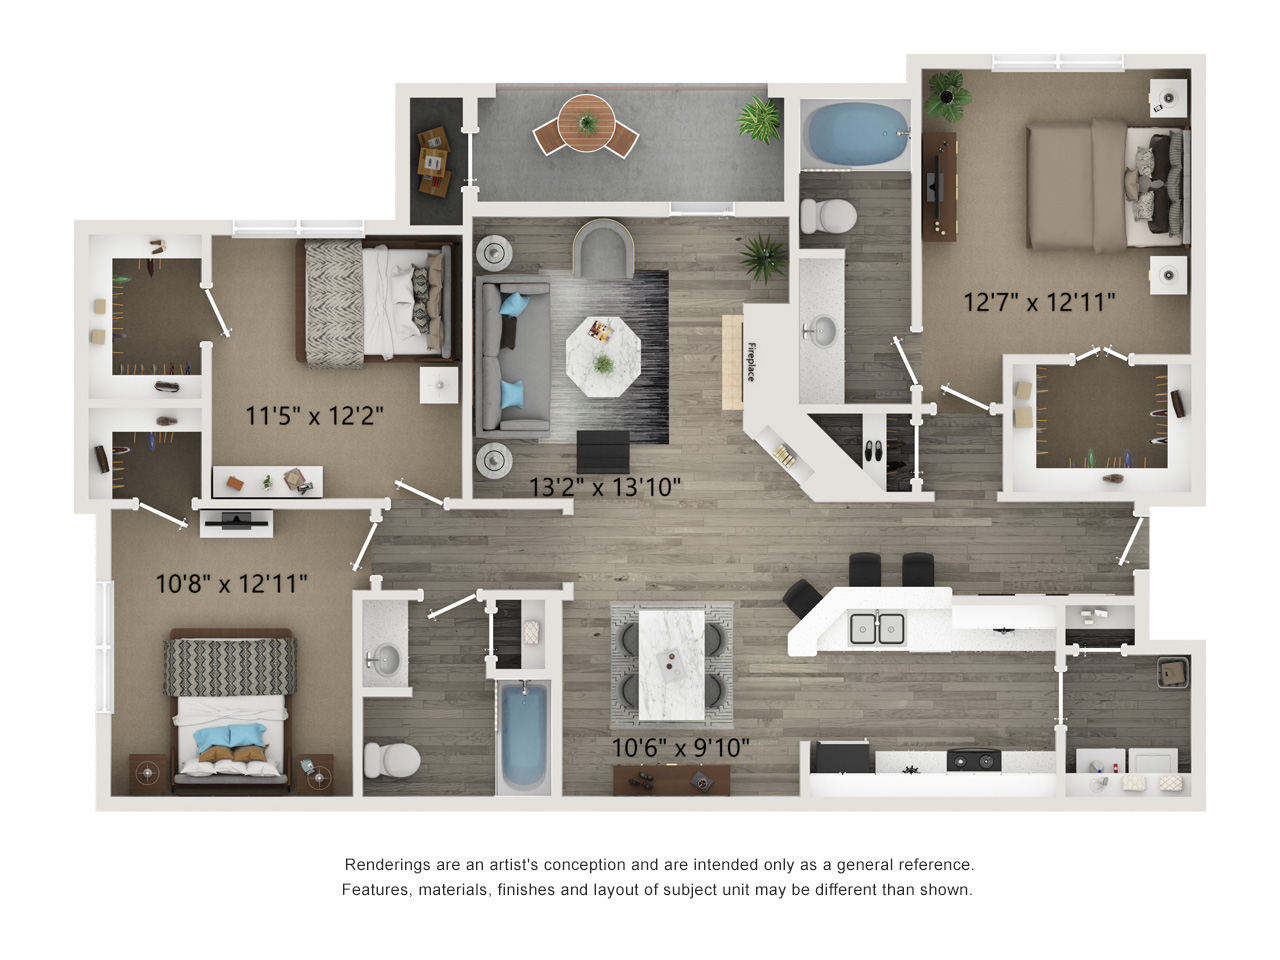 three bed two bath 1,331 square foot floor plan